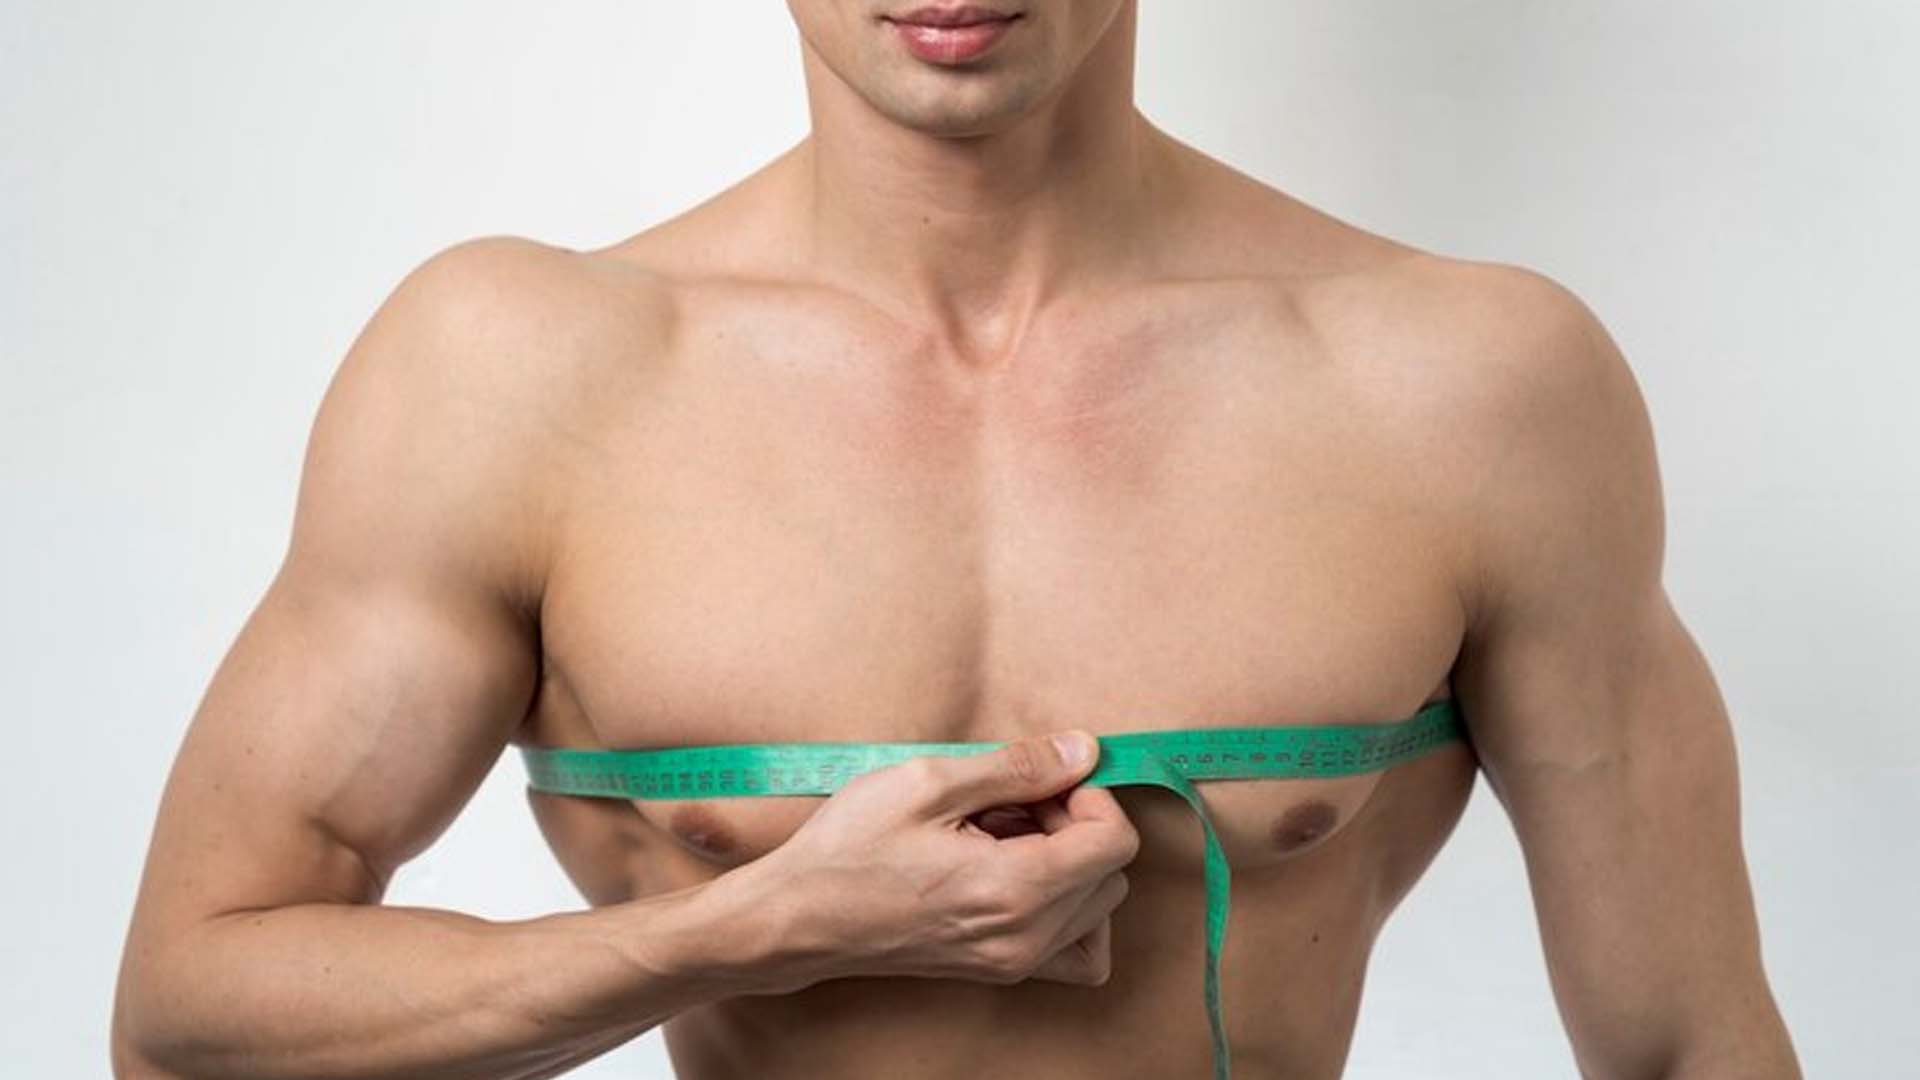 What are the Home Remedies for Gynecomastia?